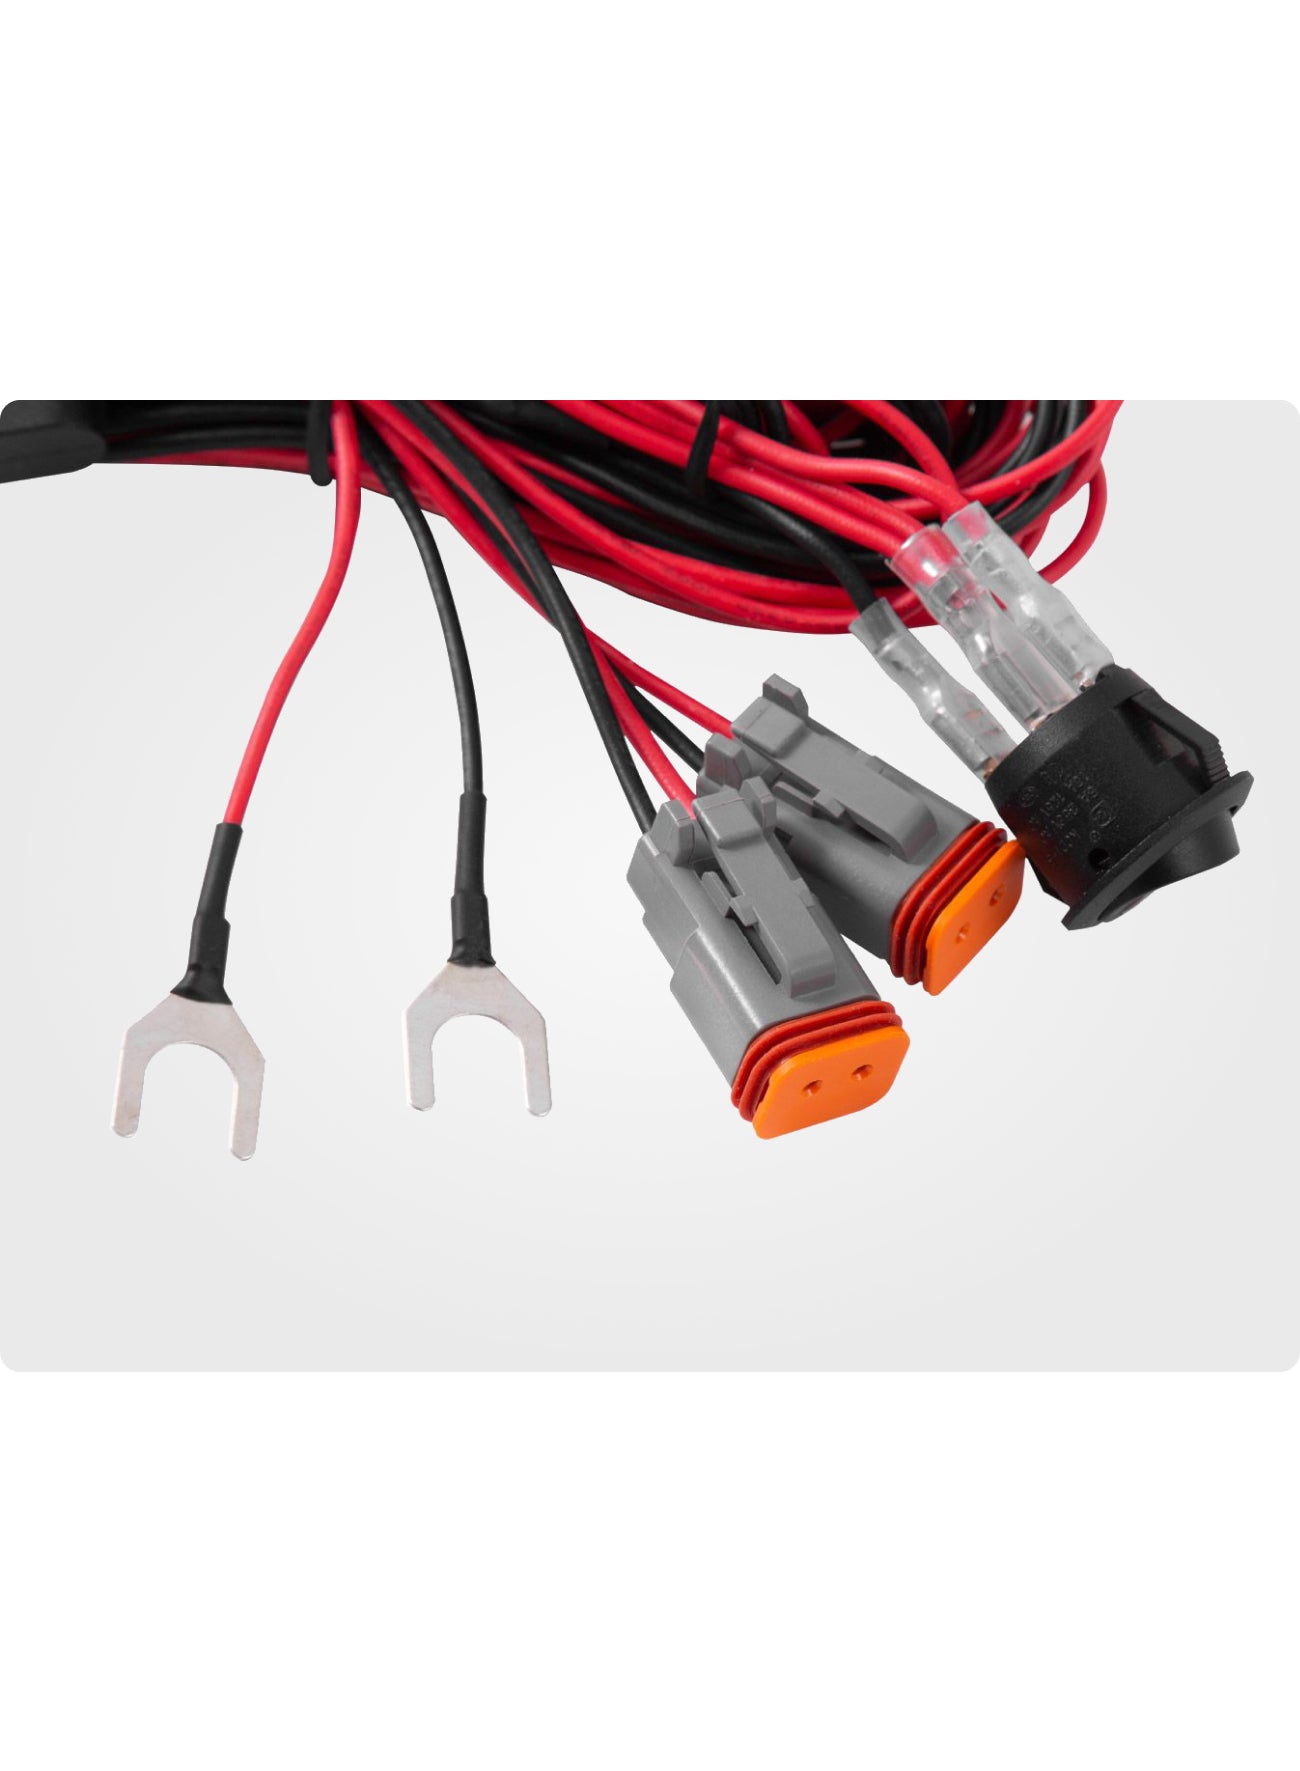 GTE Lights 2-Pin Wiring Harness